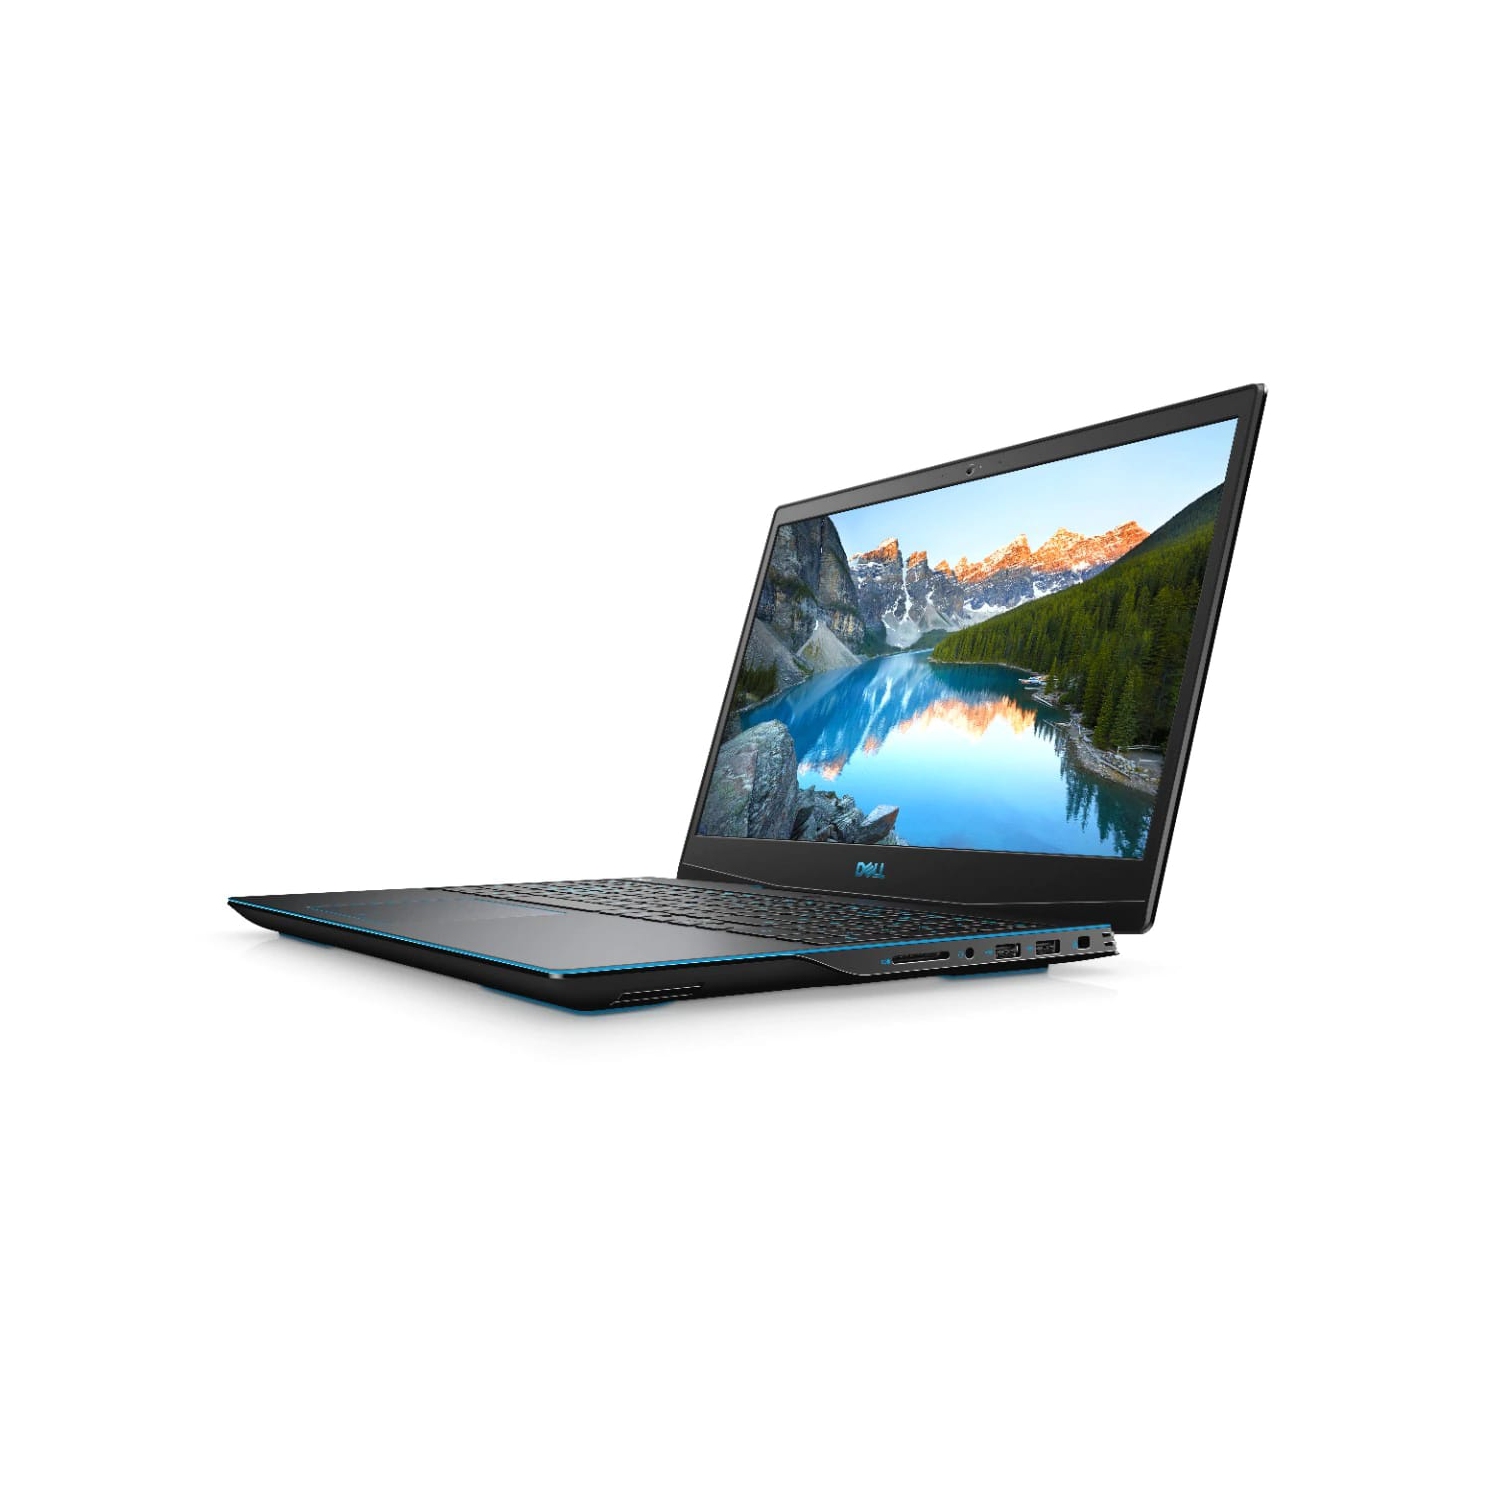 Refurbished (Excellent) – Dell G3 3500 Gaming Laptop (2020) | 15.6" FHD | Core i7 - 256GB SSD - 64GB RAM - RTX 2060 | 6 Cores @ 5 GHz - 10th Gen CPU - 6GB GDDR6